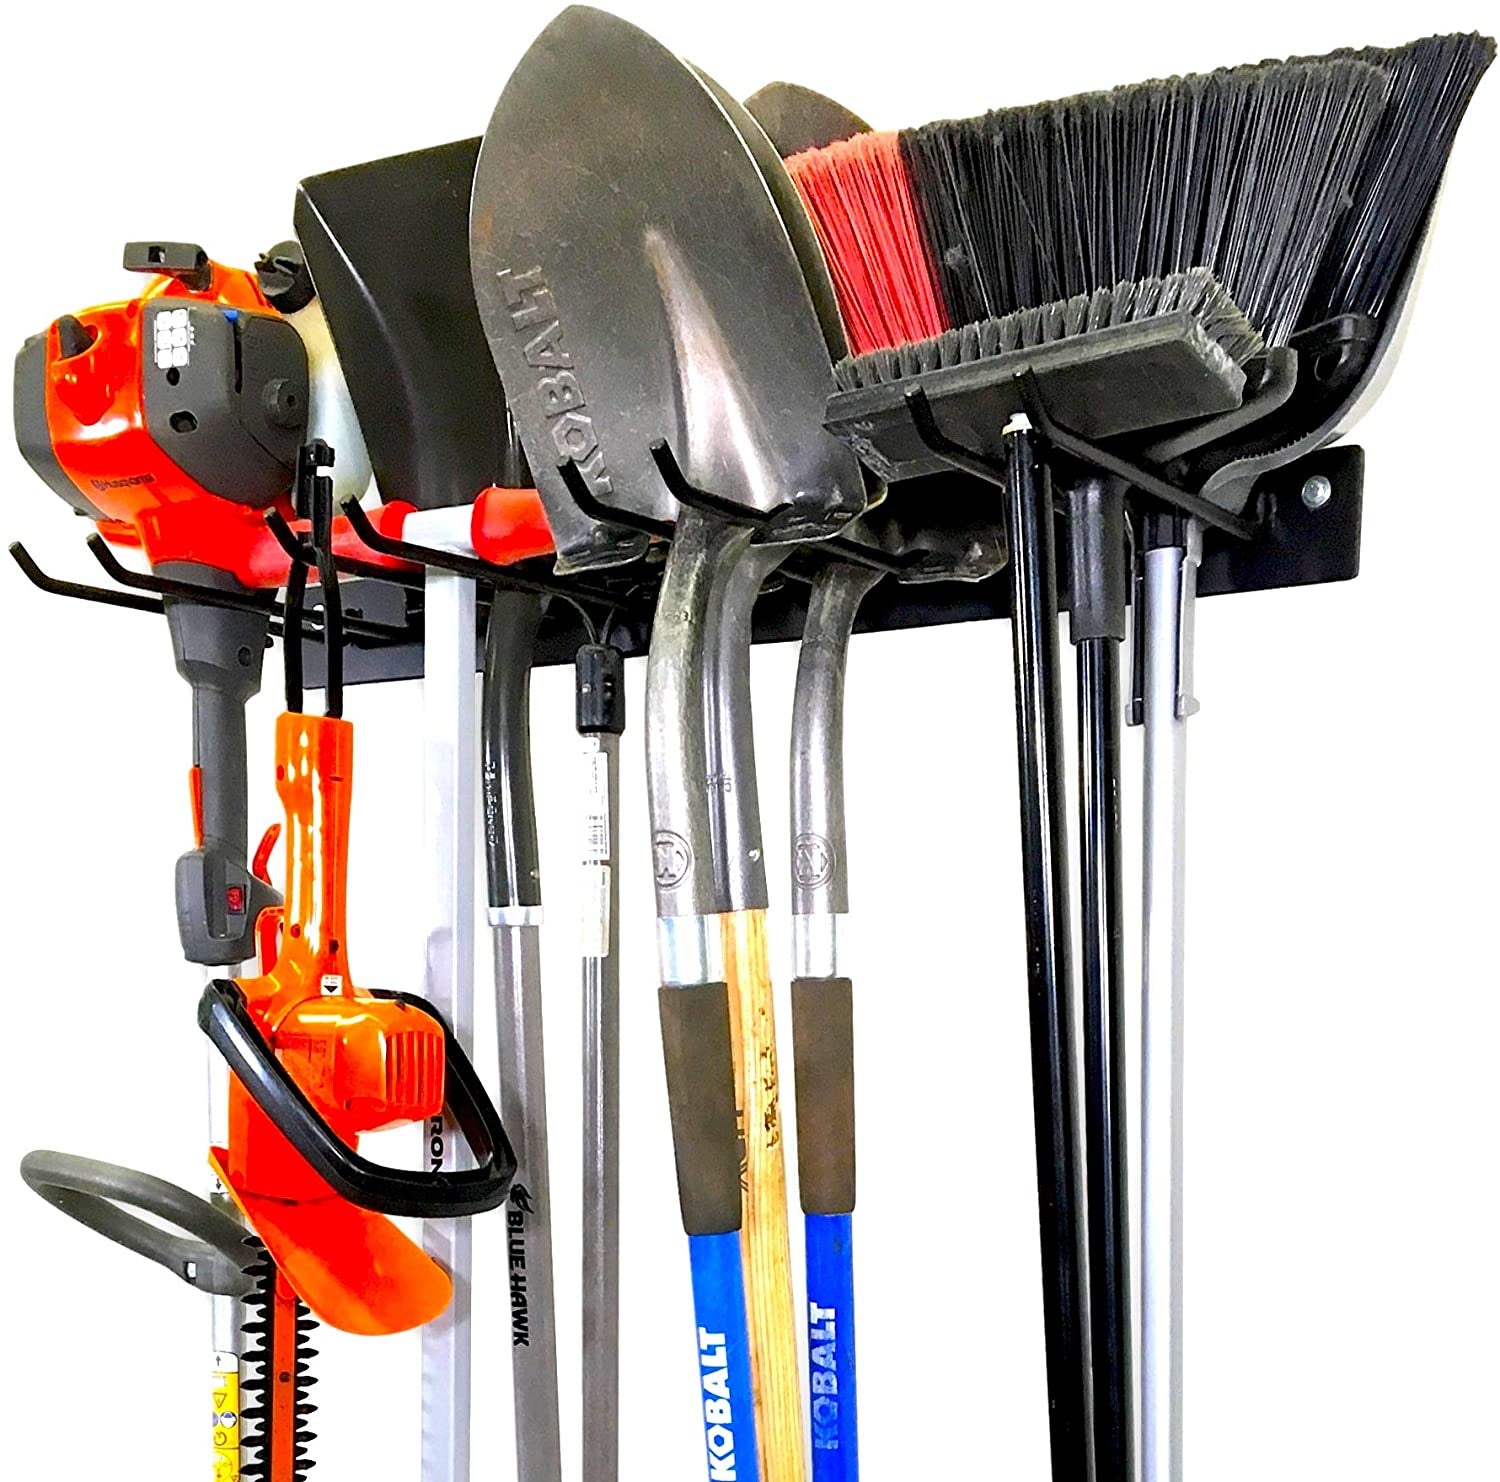 black rack with four sets of two parallel prongs; brooms, shovels, a scooter, and other tools hang off of the prongs